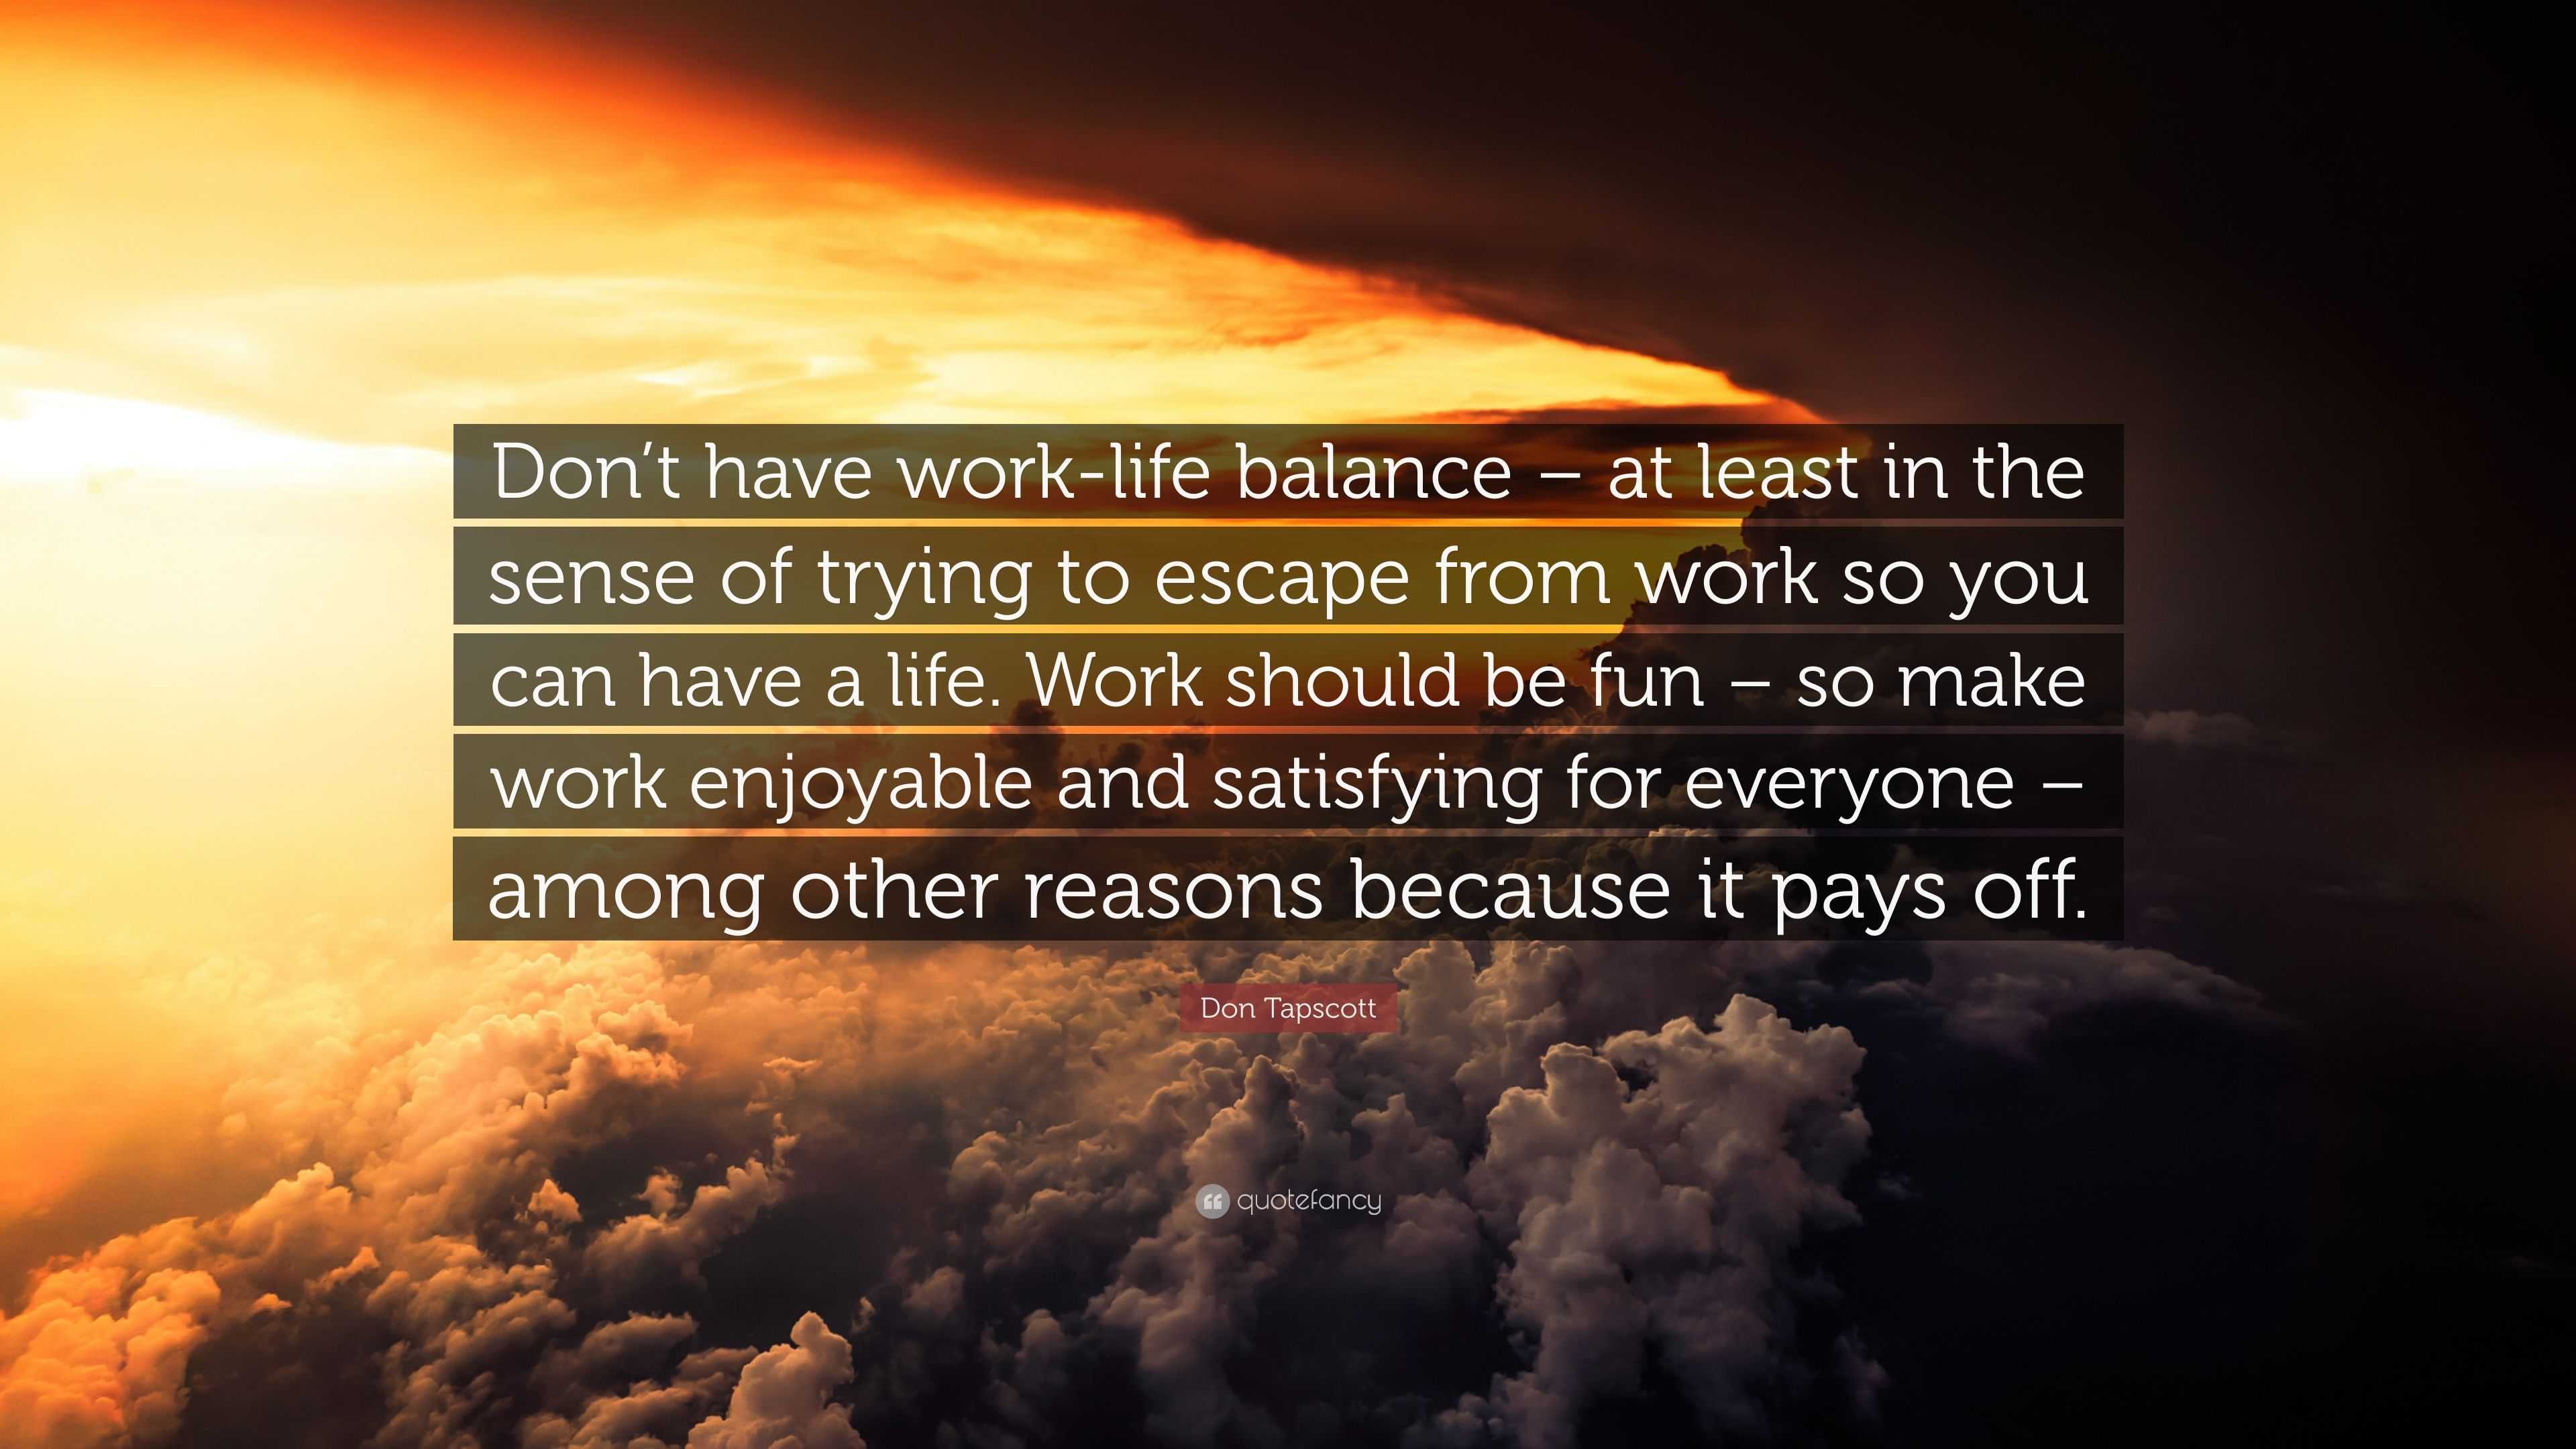 Don Tapscott Quote: “Don’t have work-life balance – at least in the ...